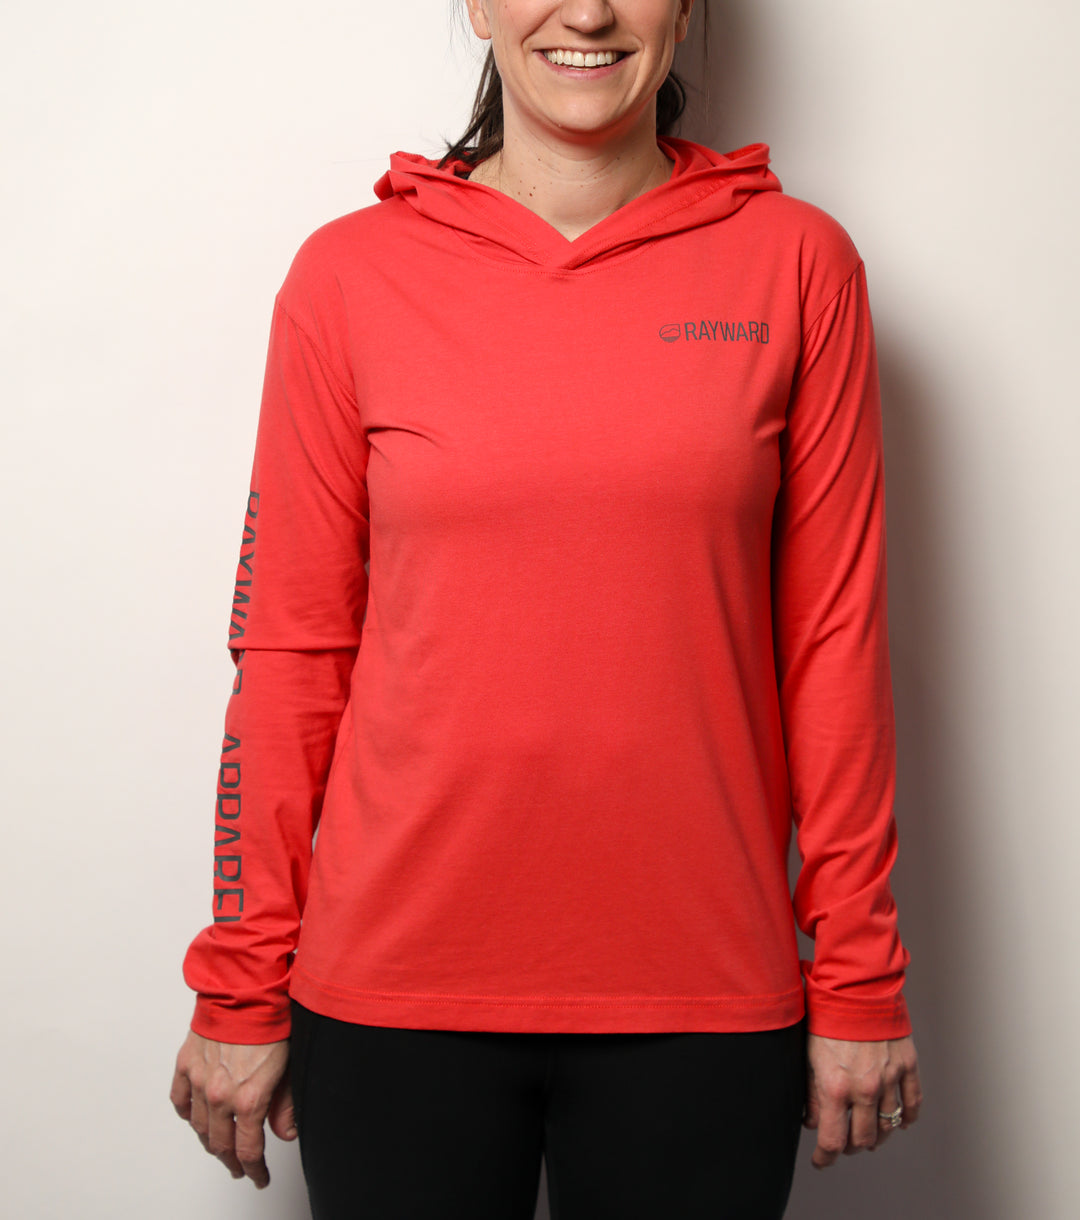 Women's Long Sleeve Hooded Shirt, UPF 45 Bamboo, Crescent City Collection - Rayward Apparel